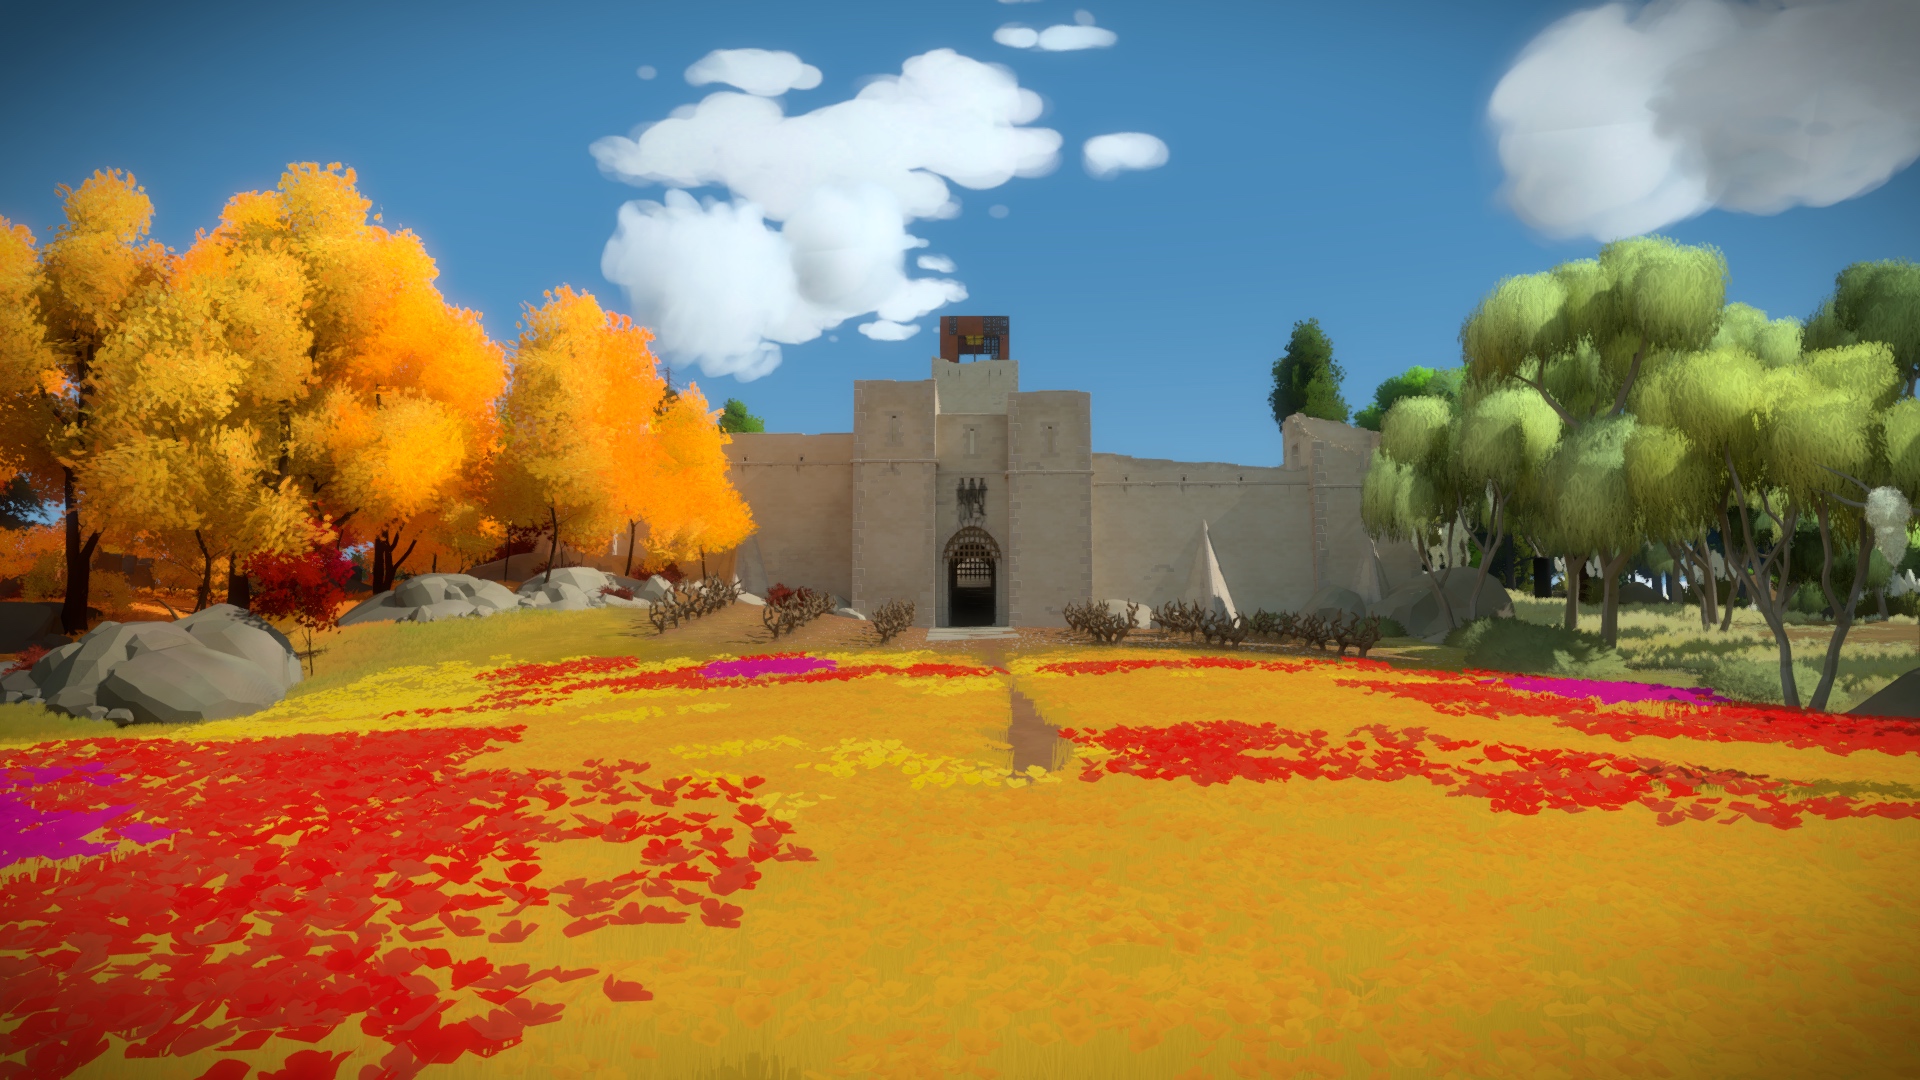 photo of Explore indie puzzler 'The Witness' on Xbox One in September image